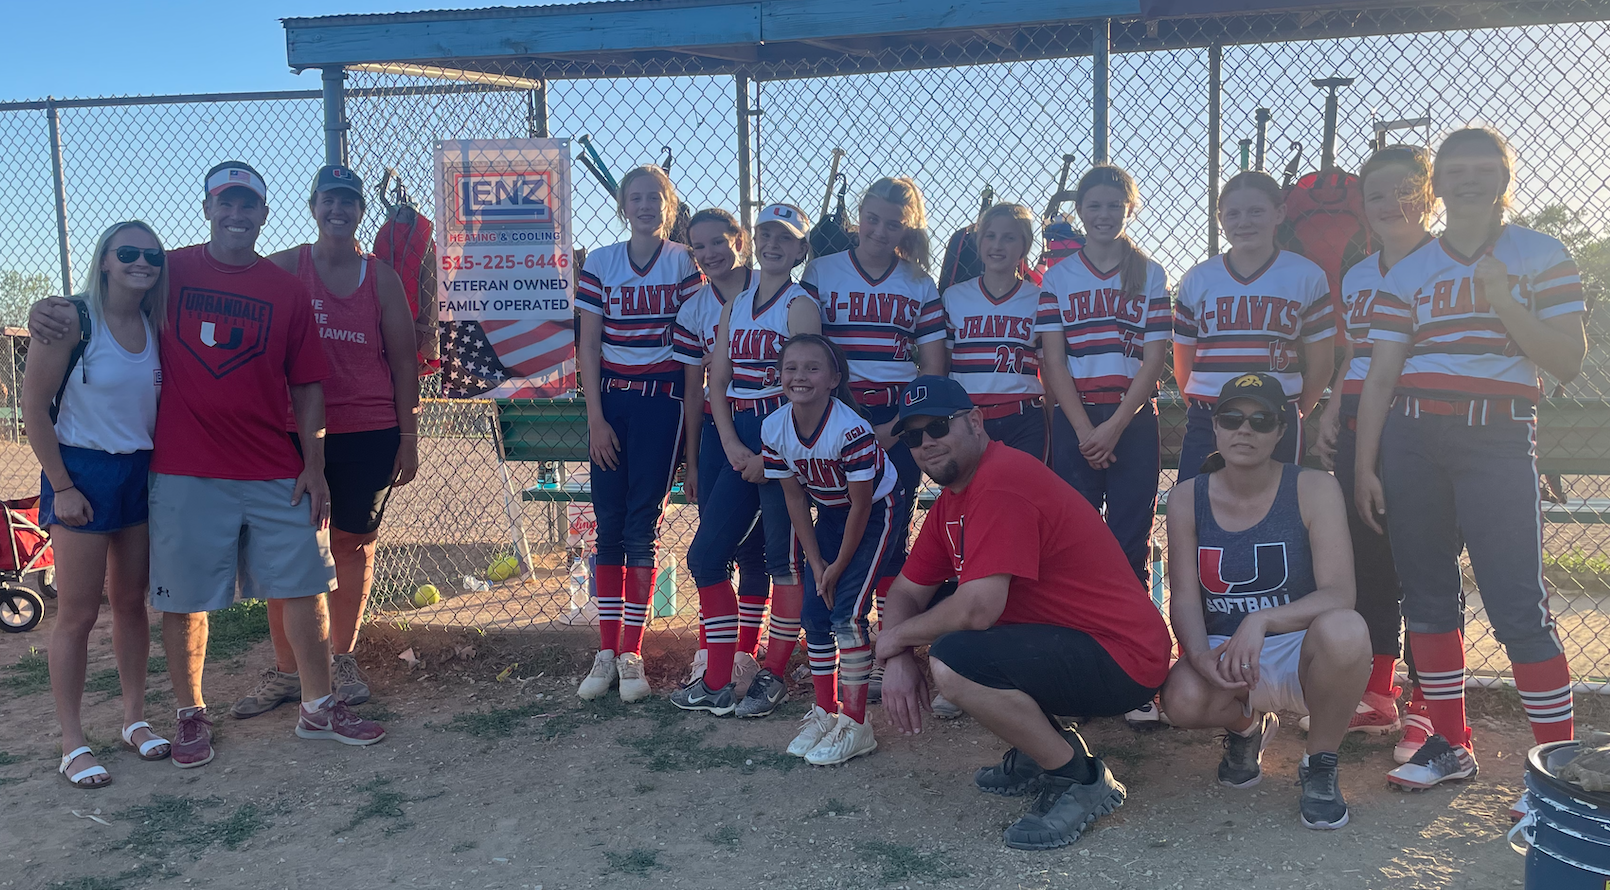 Lenz Heating and Cooling HVAC company Des Moines, Urbandale IA Chamber of Commerce, Creston IA chamber of commerce, Urbandale IA softball, community outreach